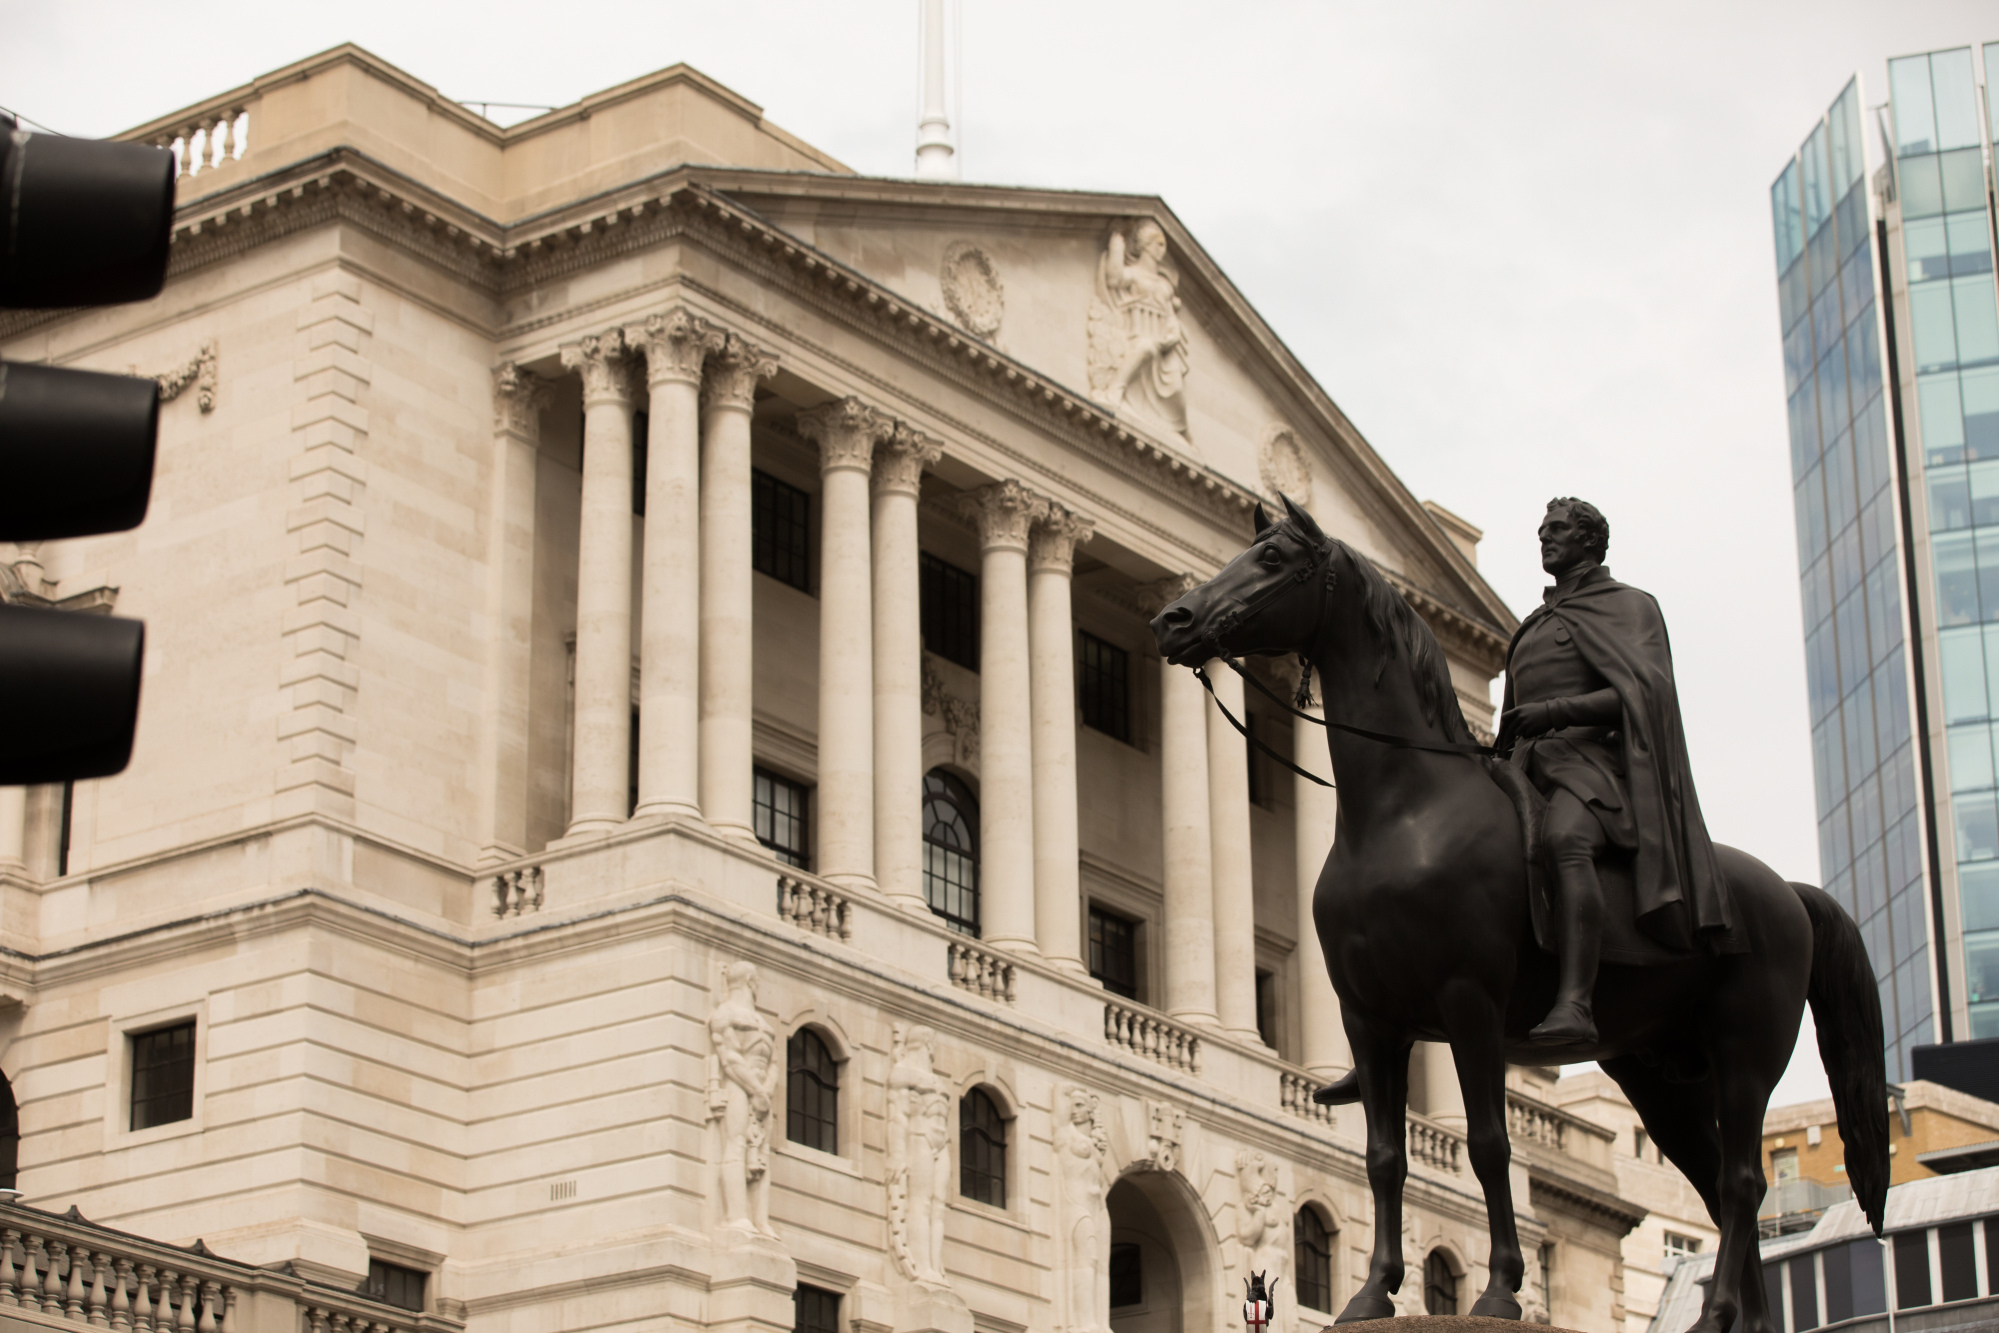 A statue of the Duke of Wellington on horseback stands in front of the Bank of England (BOE) in the City of London, U.K.